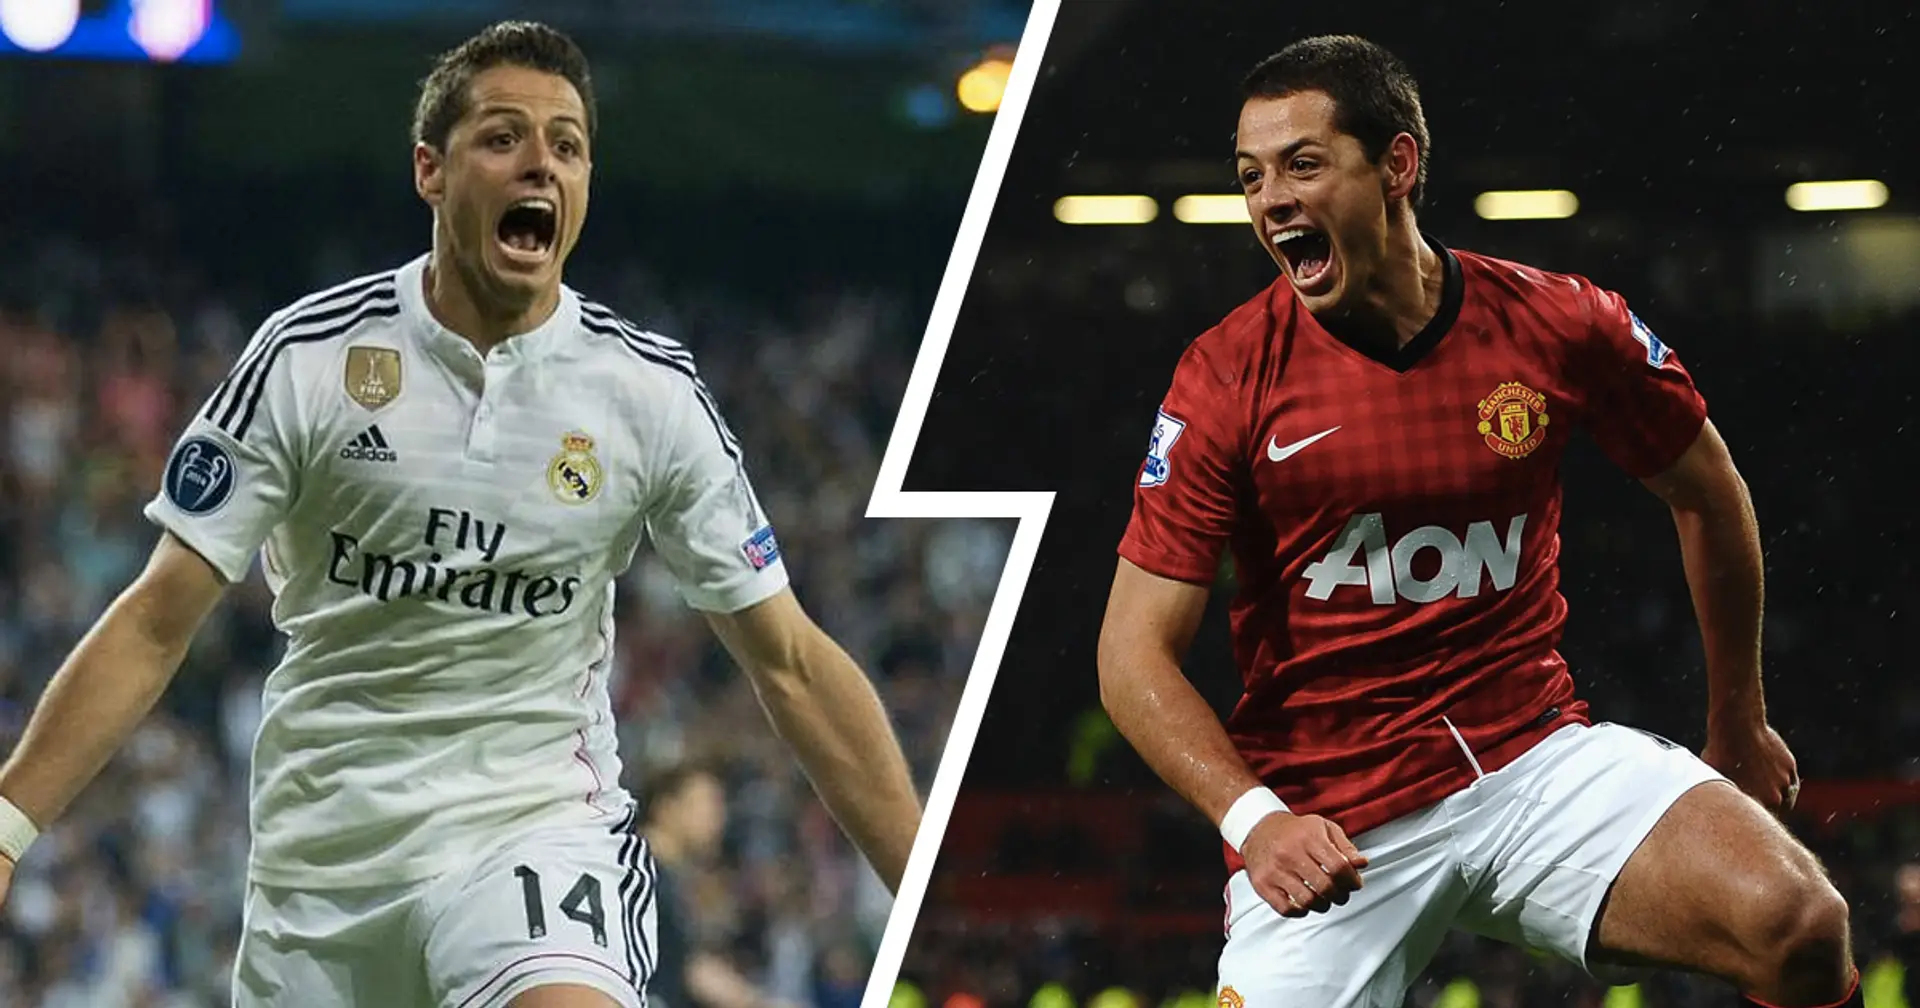 'It is more the Latino way': Javier Hernandez names differences between playing at Real Madrid and Man United